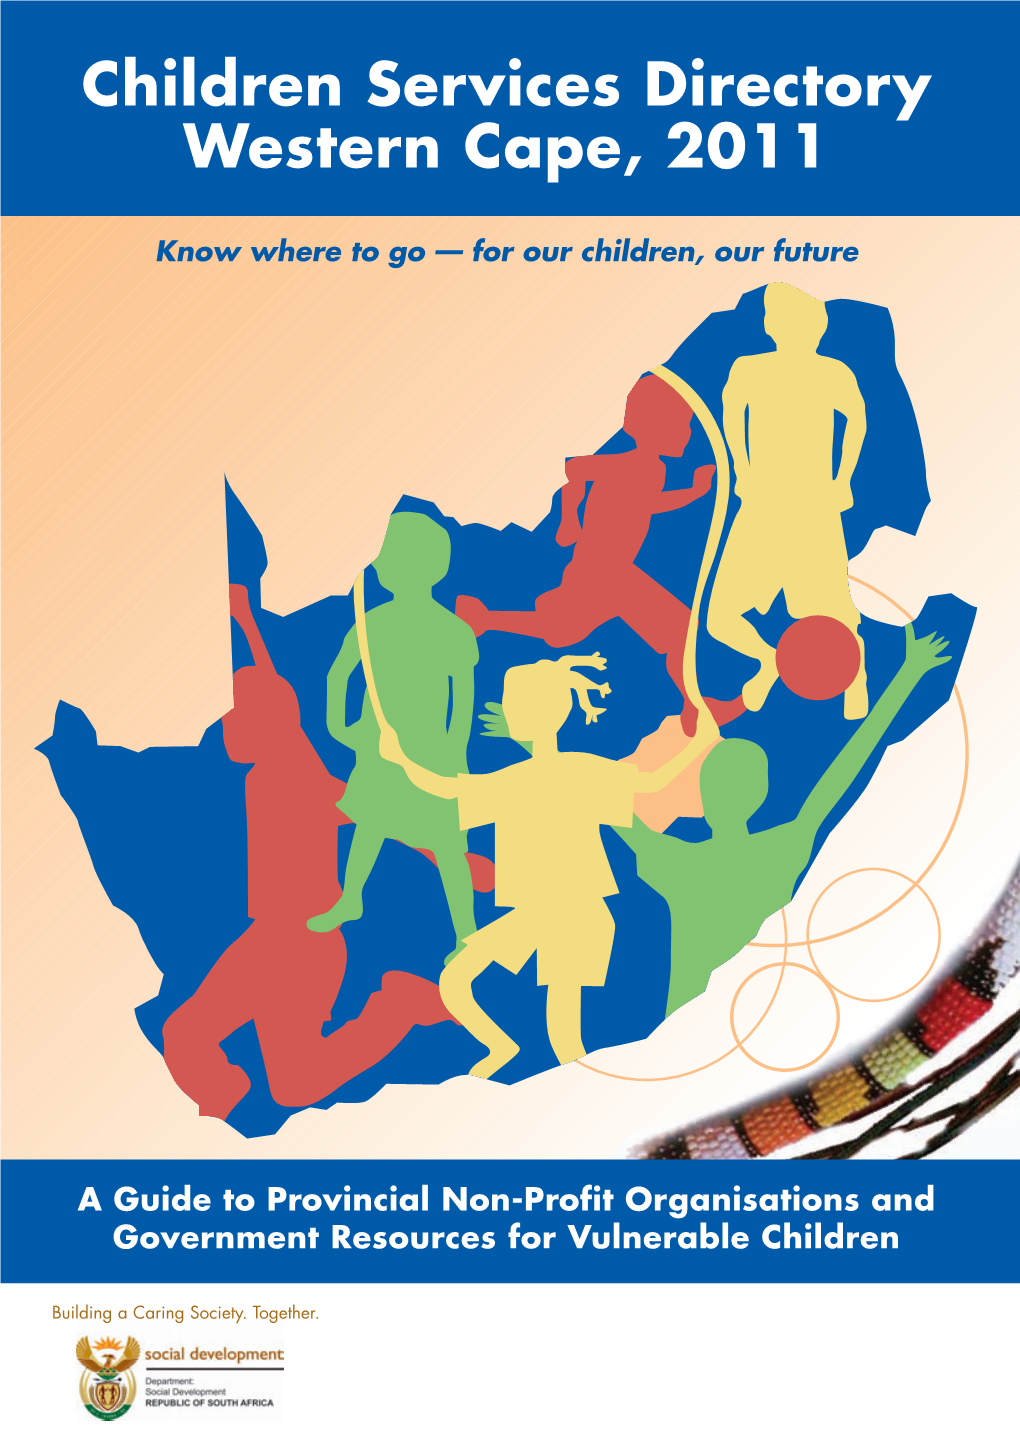 Services Directory for Children — Western Cape